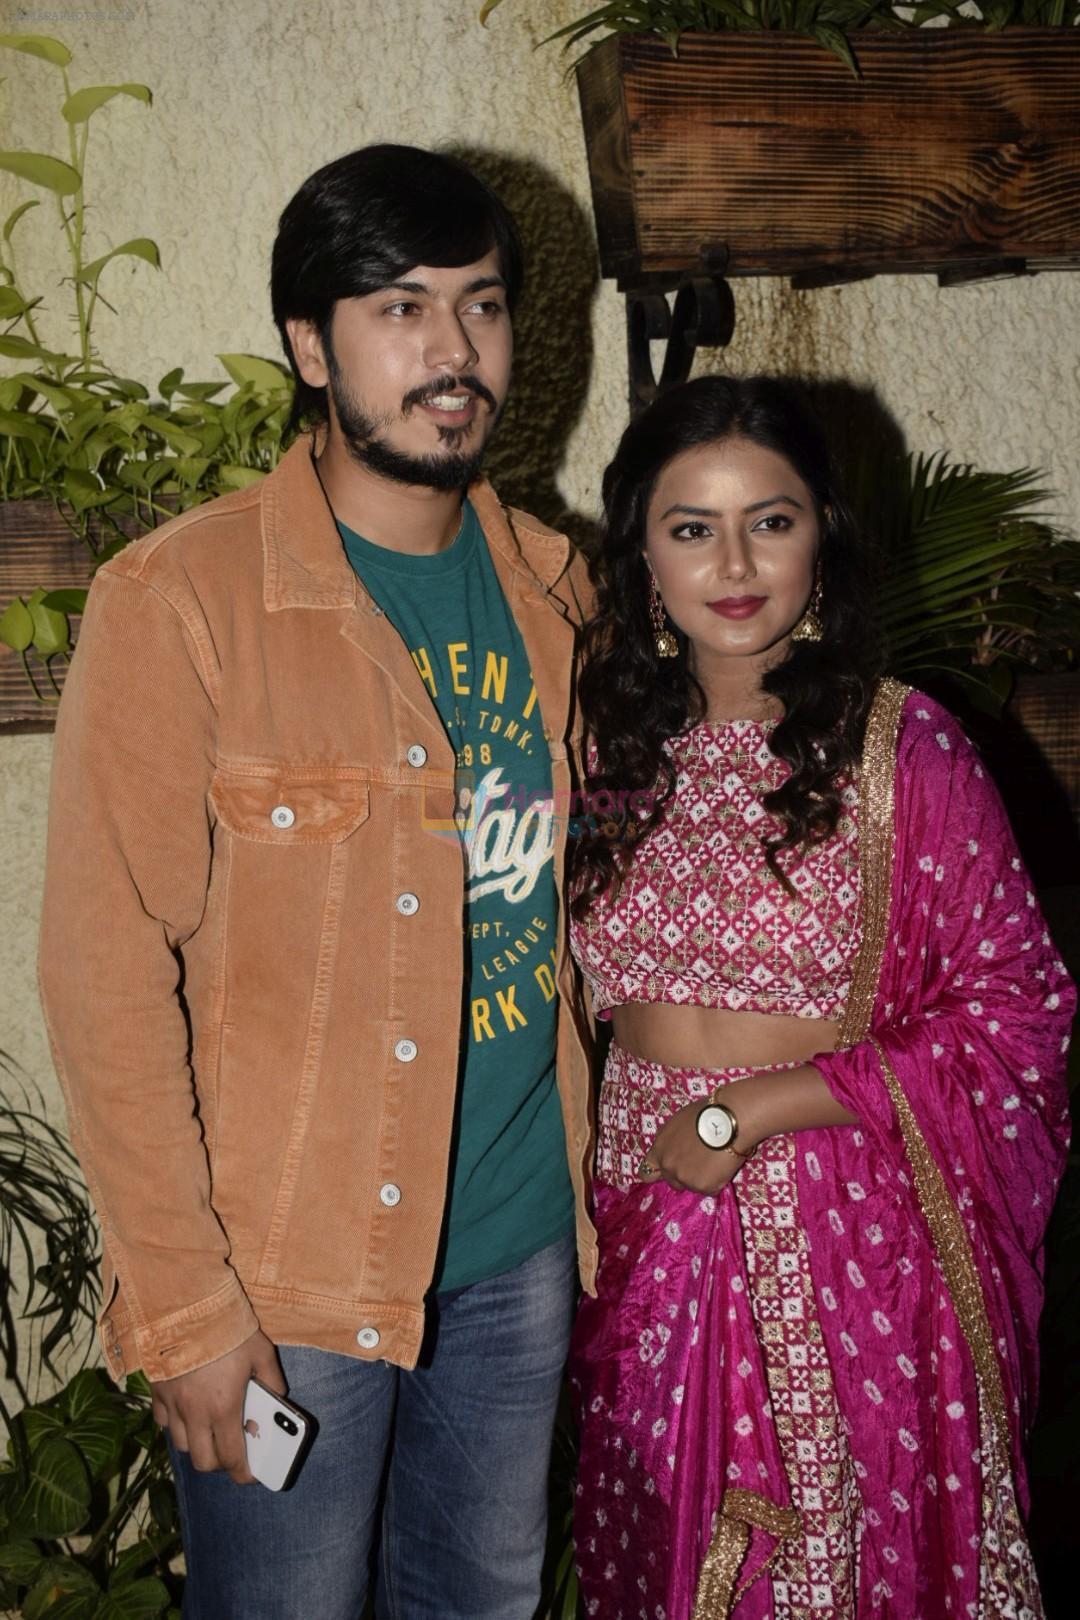 Rutwik Kendre, Monalisa Bhagal at the Screening of marathi film Dry Day in sunny sound juhu on 12th July 2018